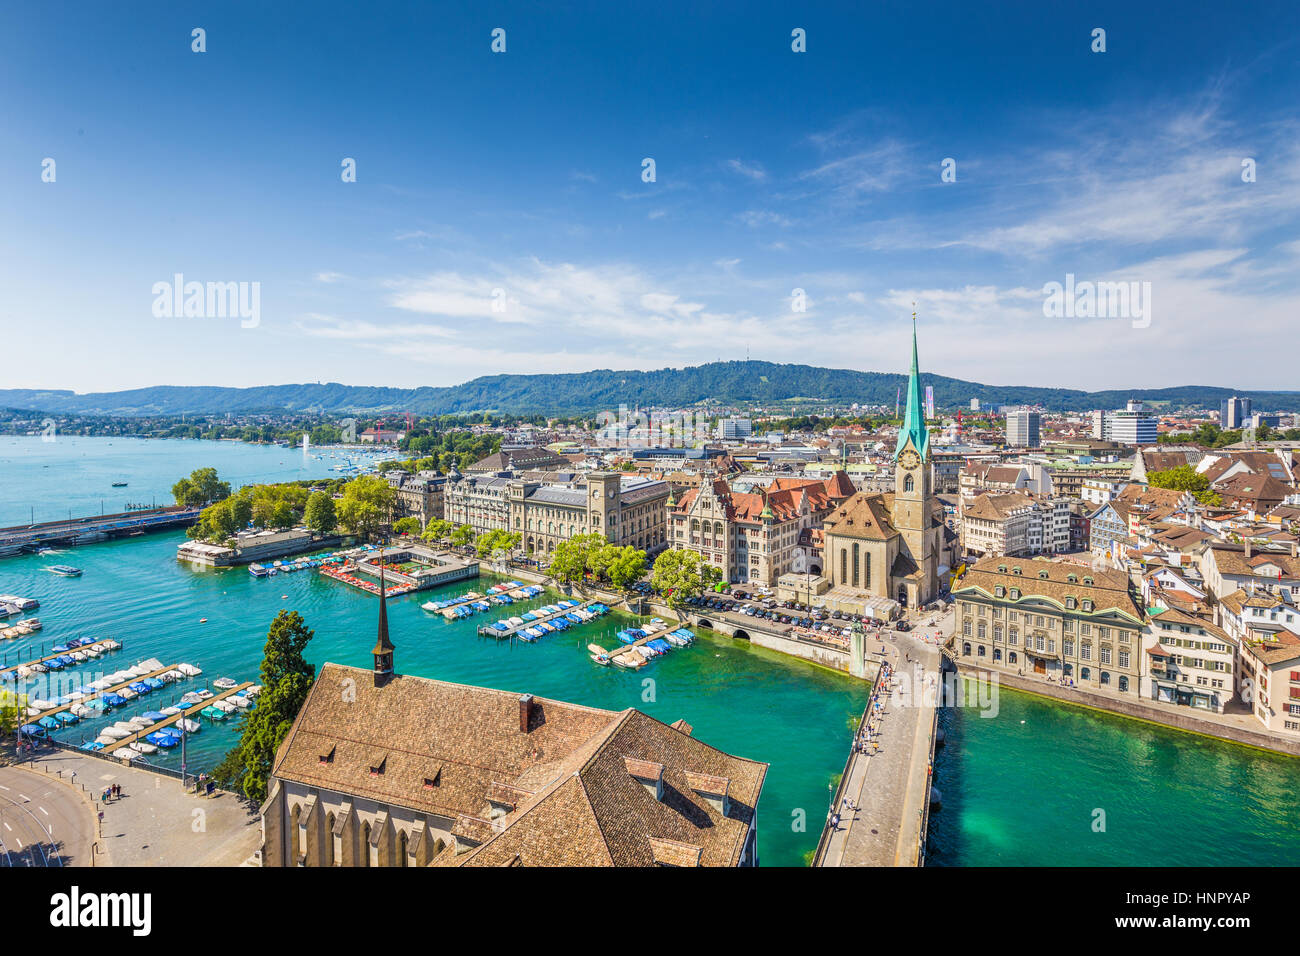 Aerial view of Zurich city center with famous Fraumunster Church and river Limmat at Lake Zurich from Grossmunster Church, Canton Zurich, Switzerland Stock Photo